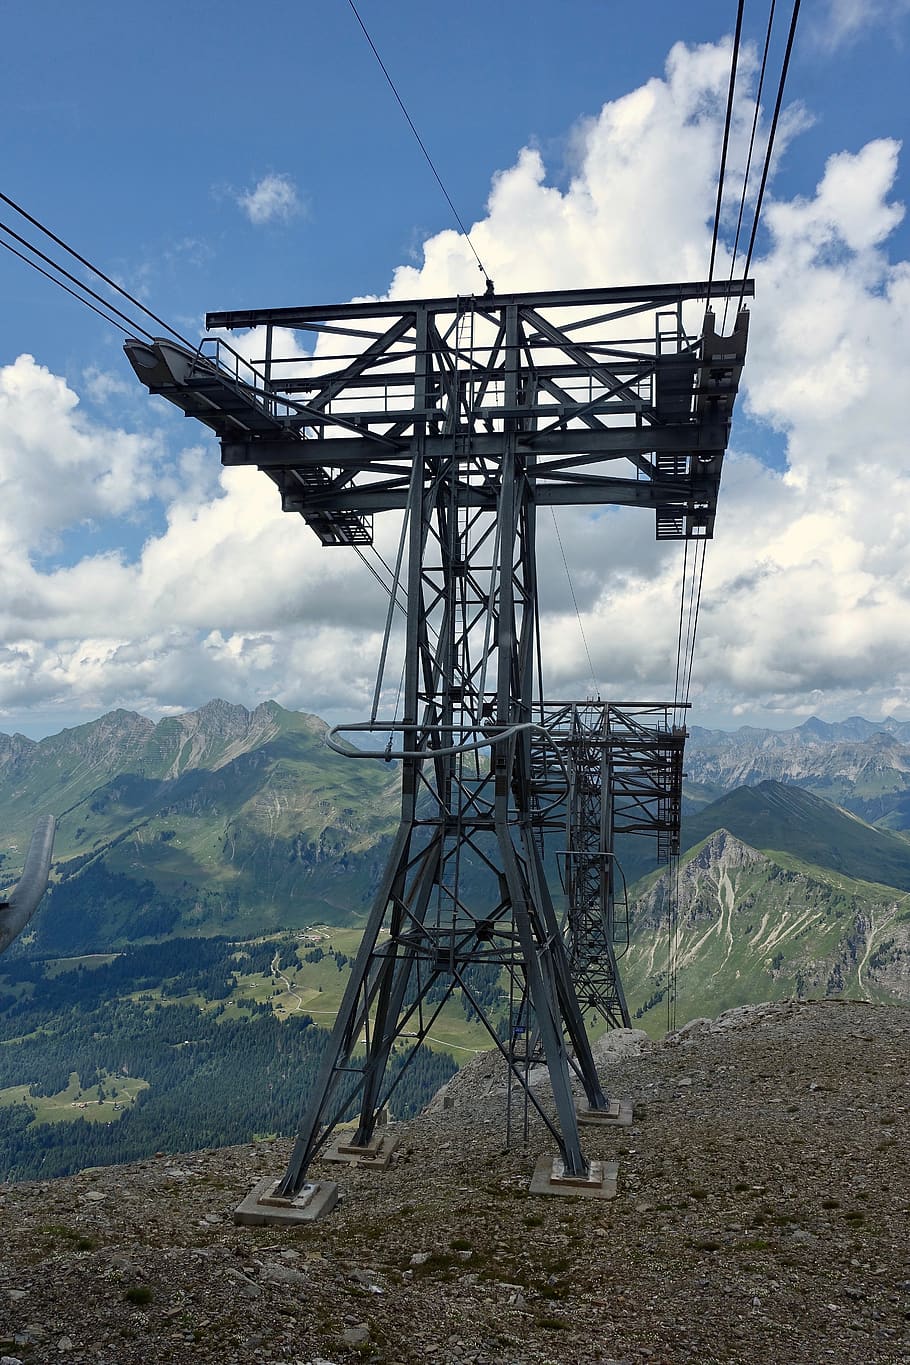 pylon, frame, cable car, steele, cable, infrastructure, sky, industry, power, outdoors